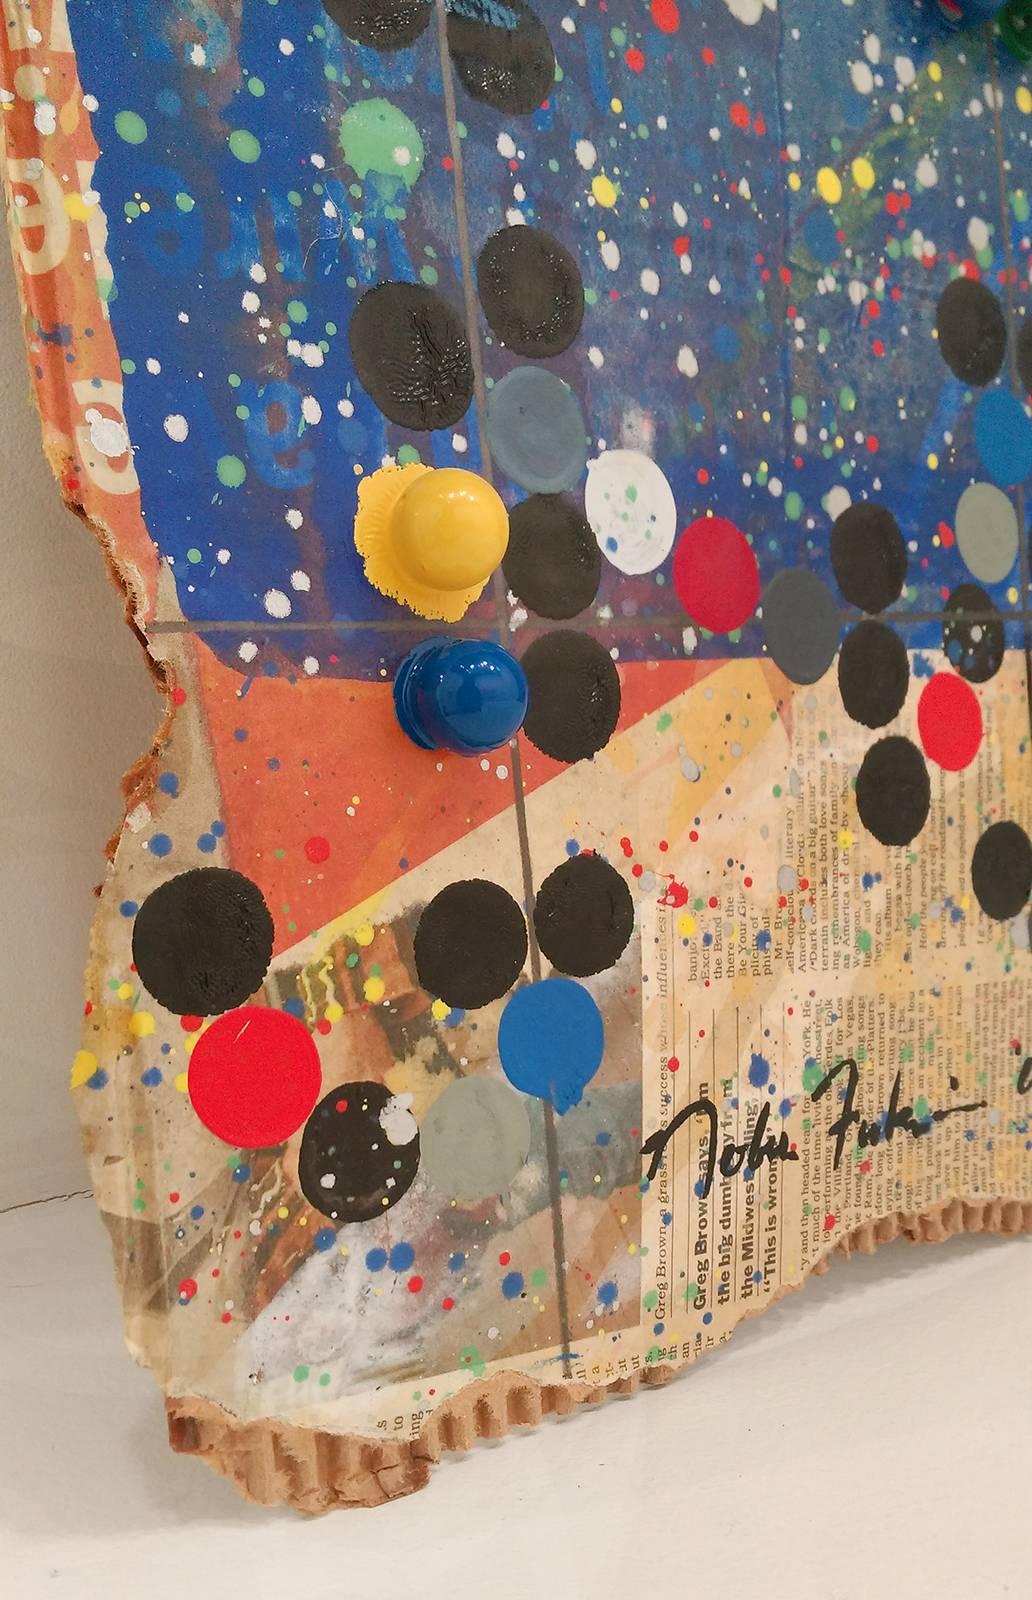 Nobu Fukui's Feast of Prokofiev is primarily blue, white, yellow, taupe with red, black and green dots. 

Born in Japan, Nobu Fukui lives and works in New York. Inspired by the Action painters, Fukui creates currents of color and dimension on